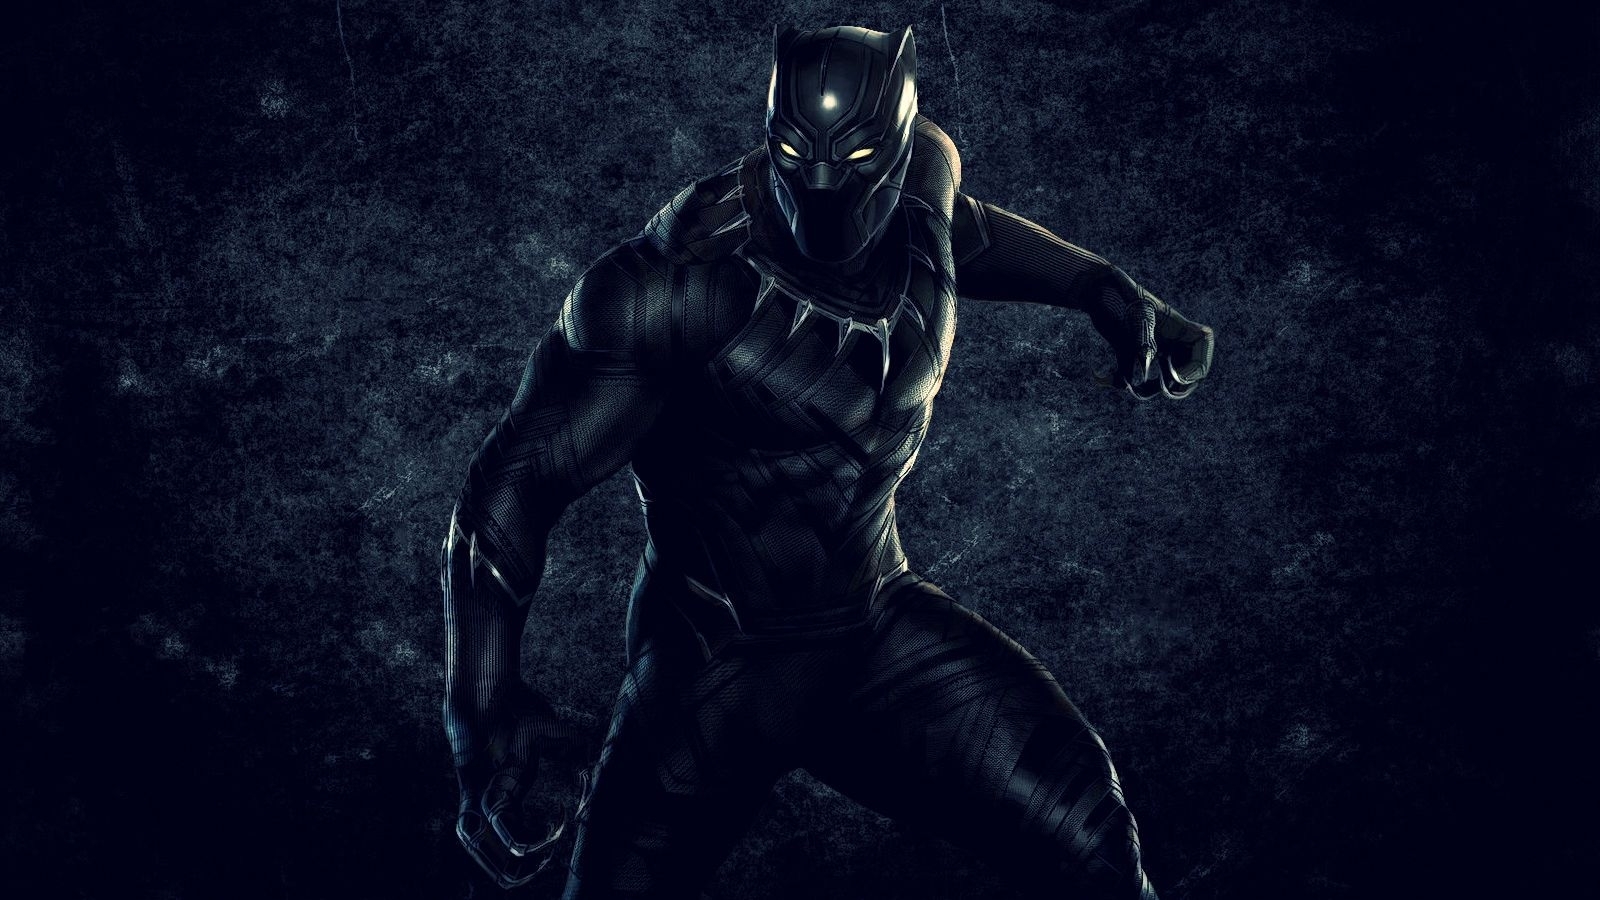 10 New And Most Current Black Panther Wallpaper Marvel for Desktop with FUL...